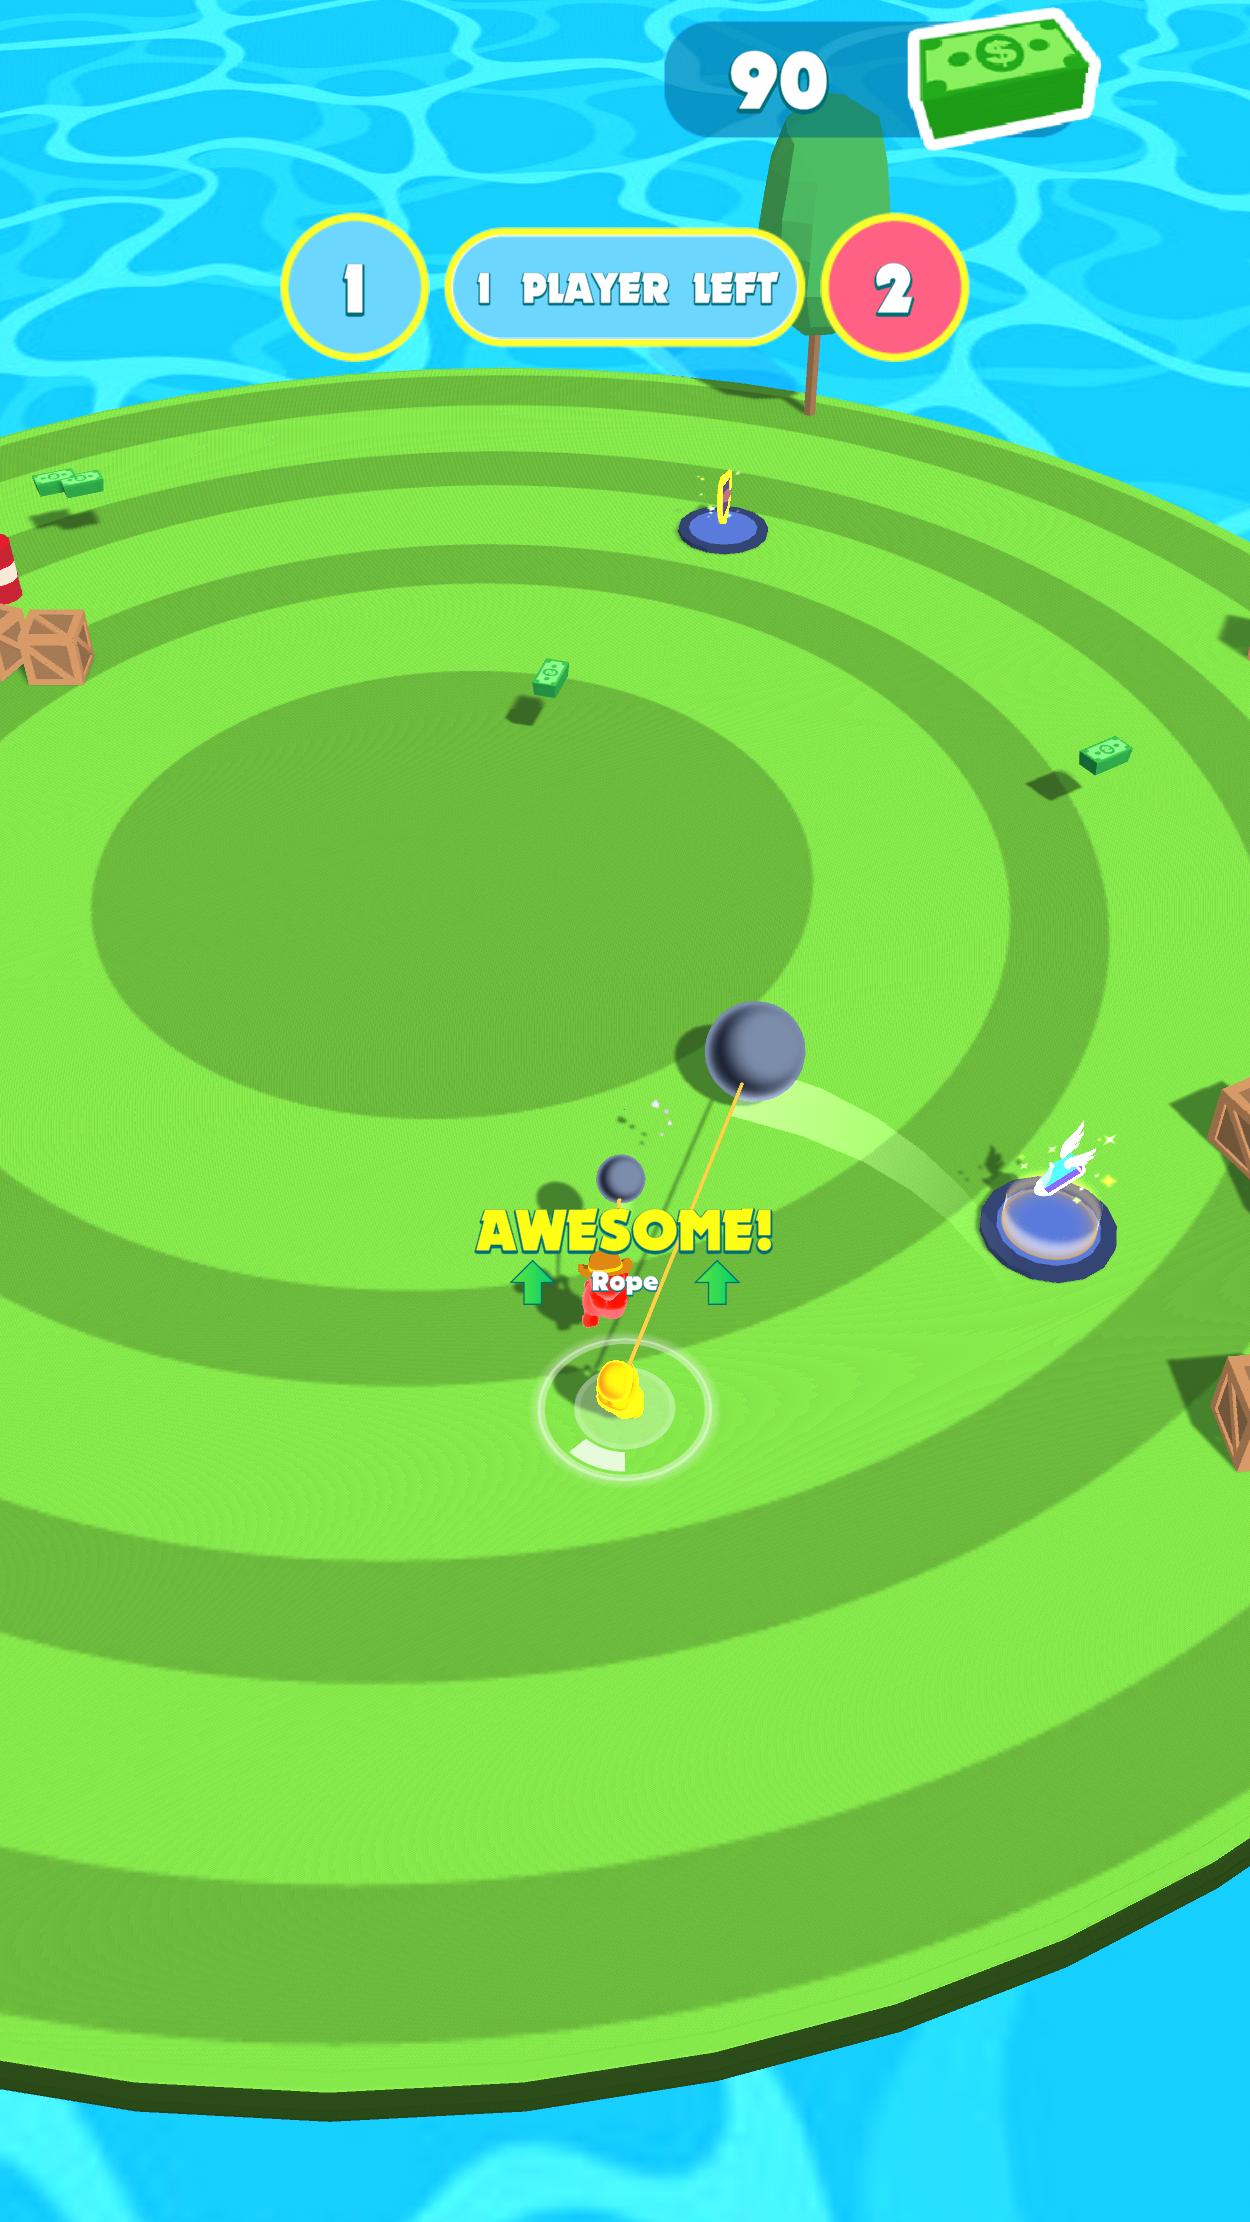 Spin Smashers.io for Android - APK Download